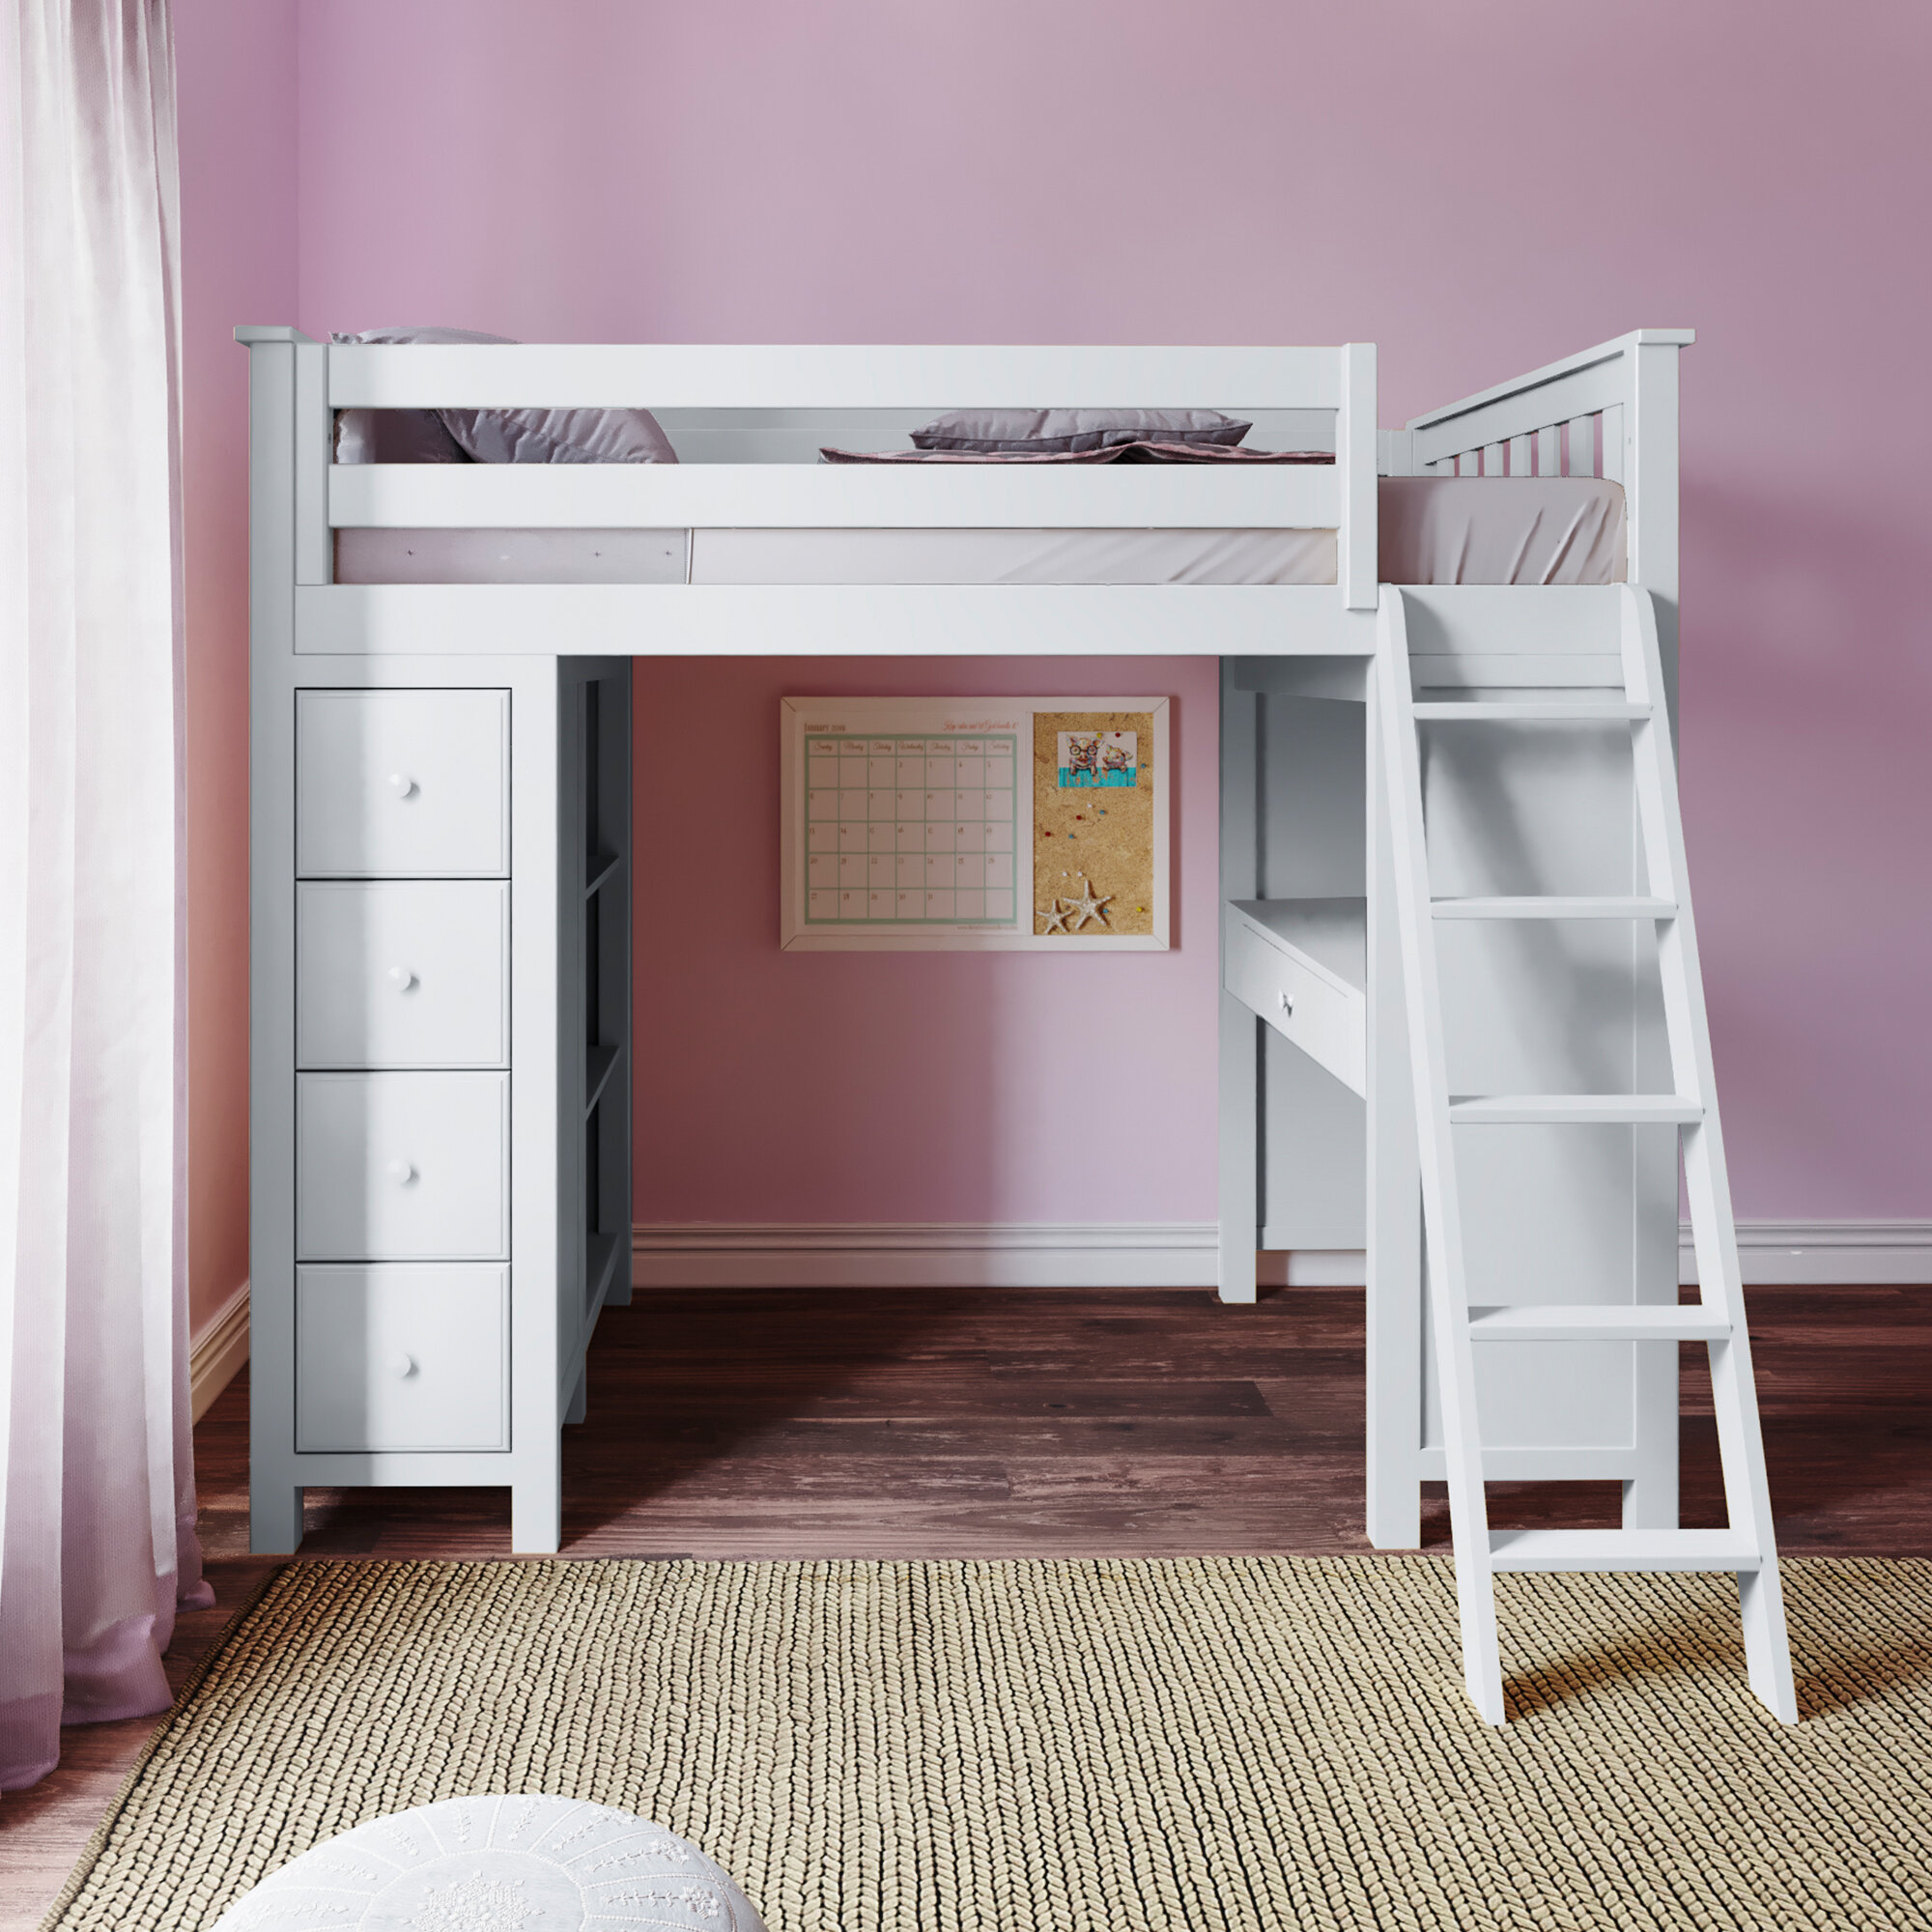 bunk bed with loft and desk